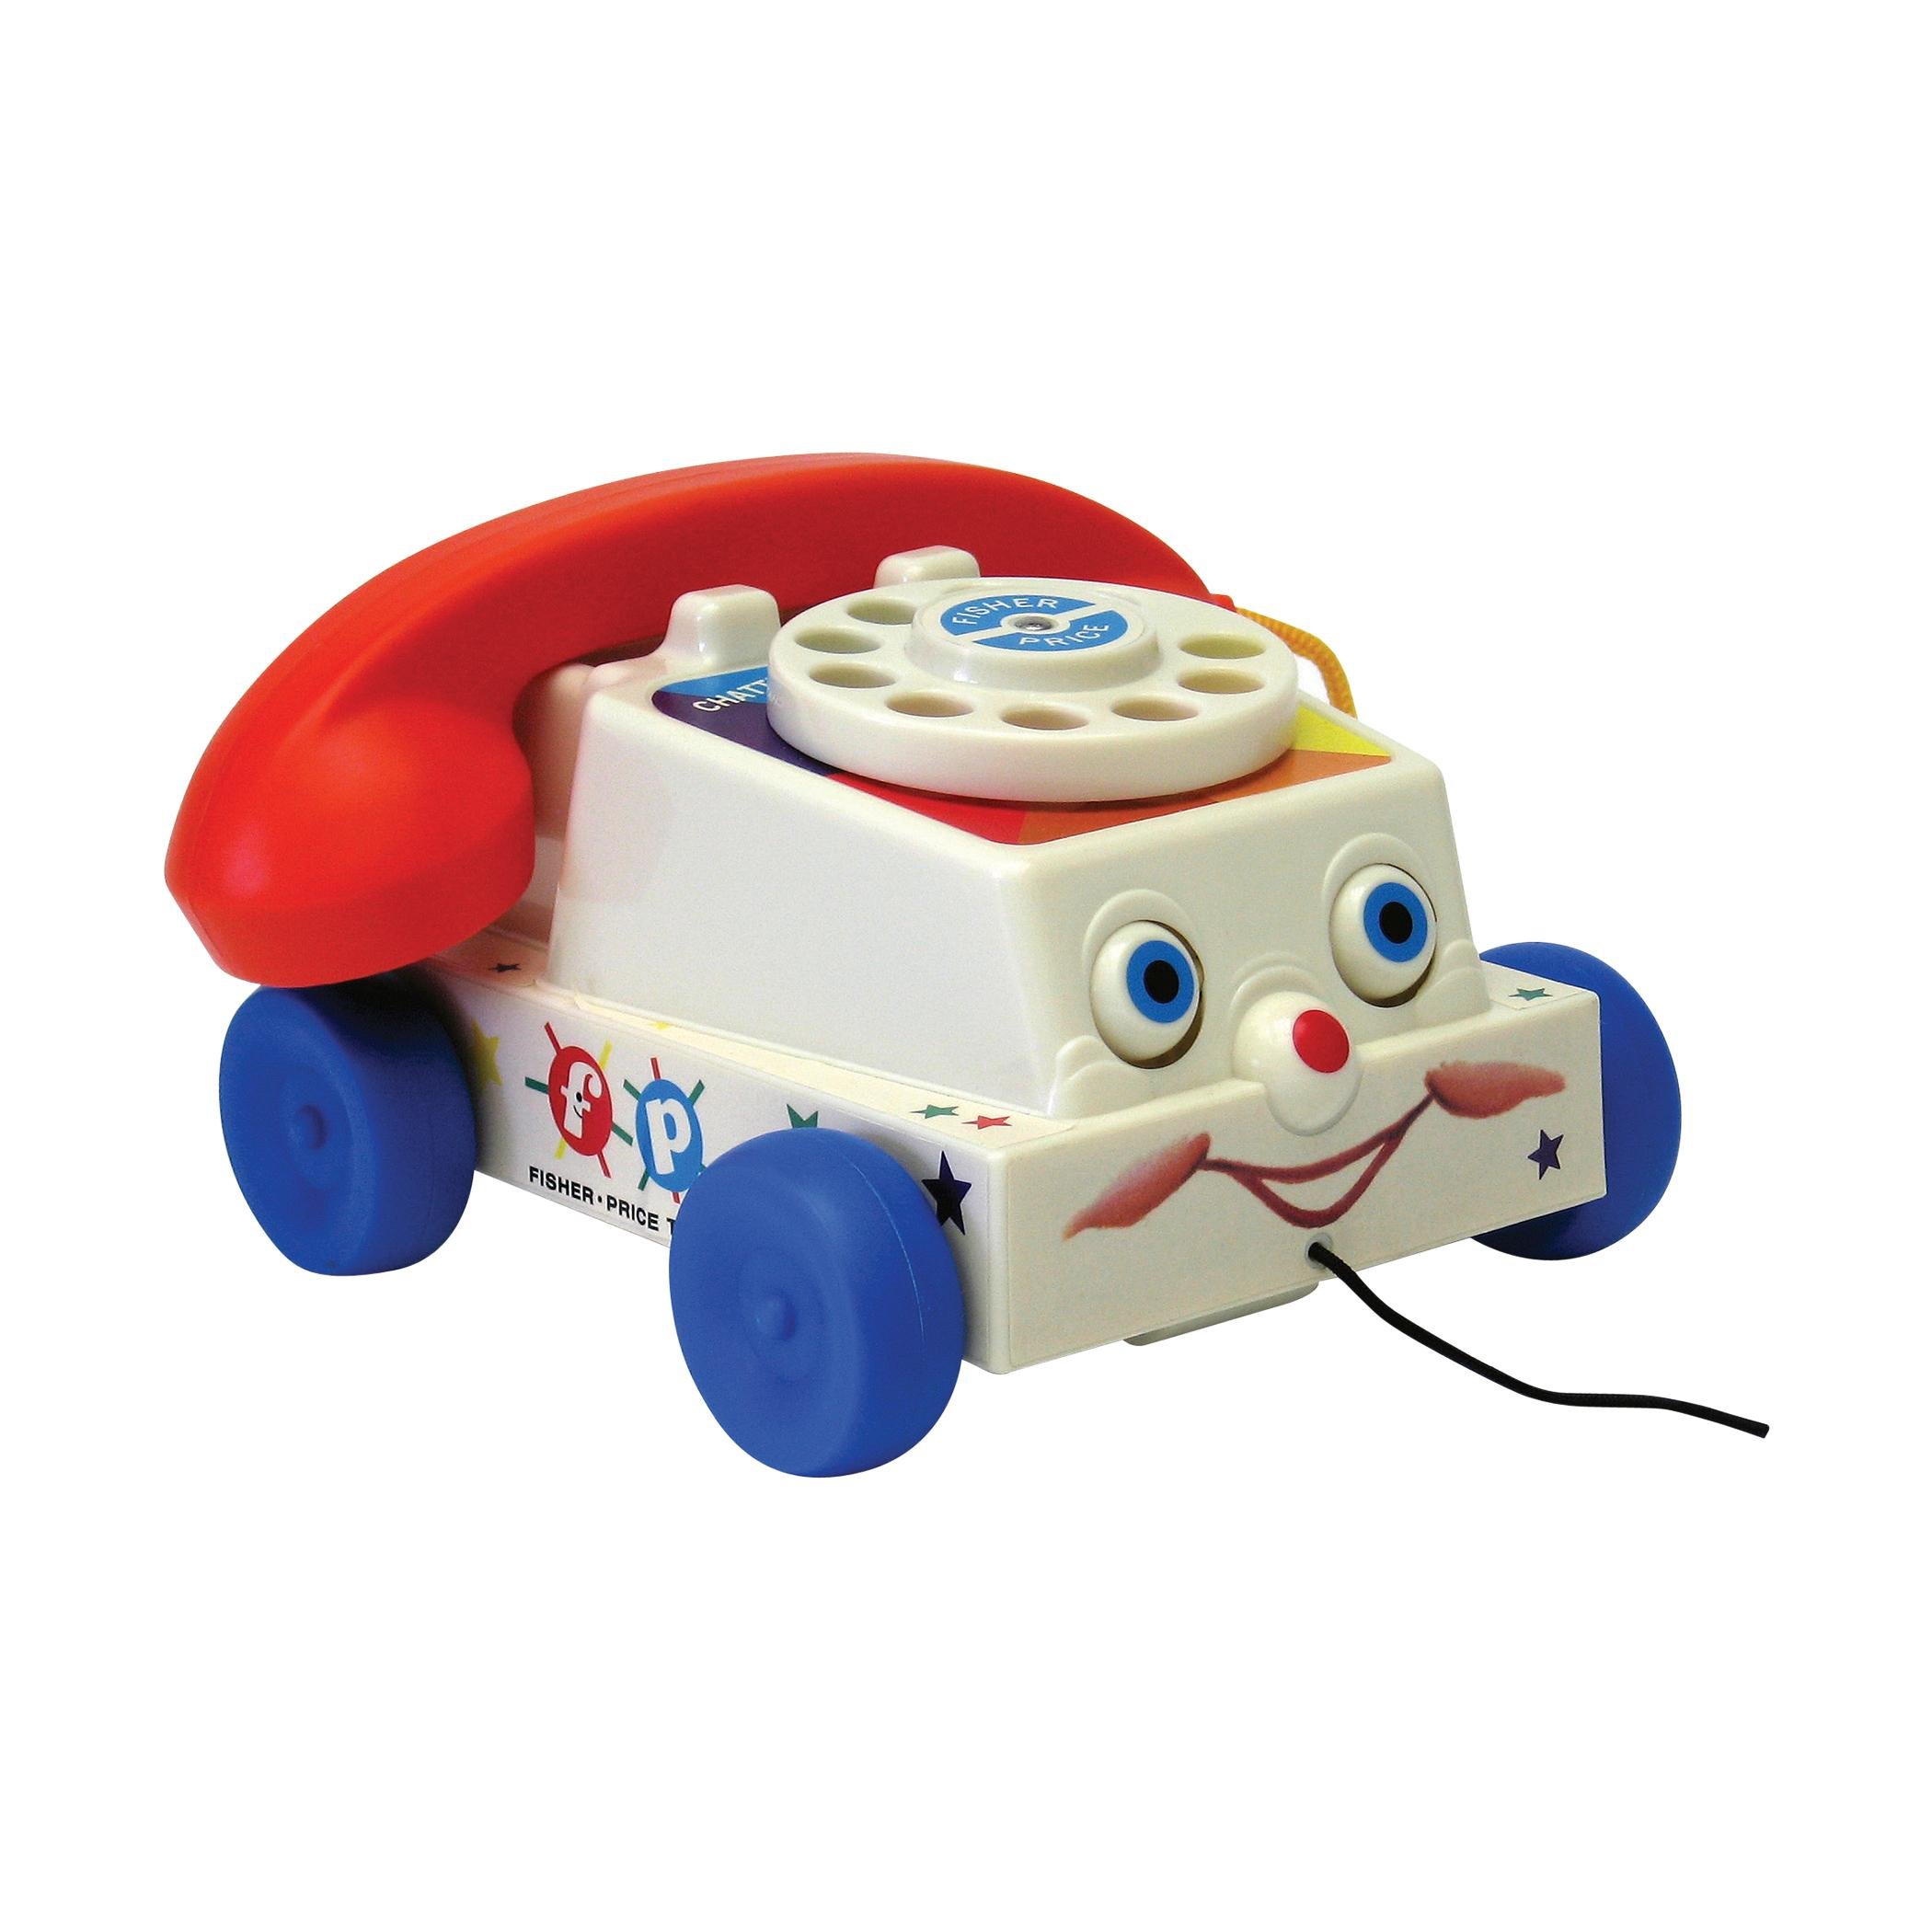  Chatter Telephone Toy